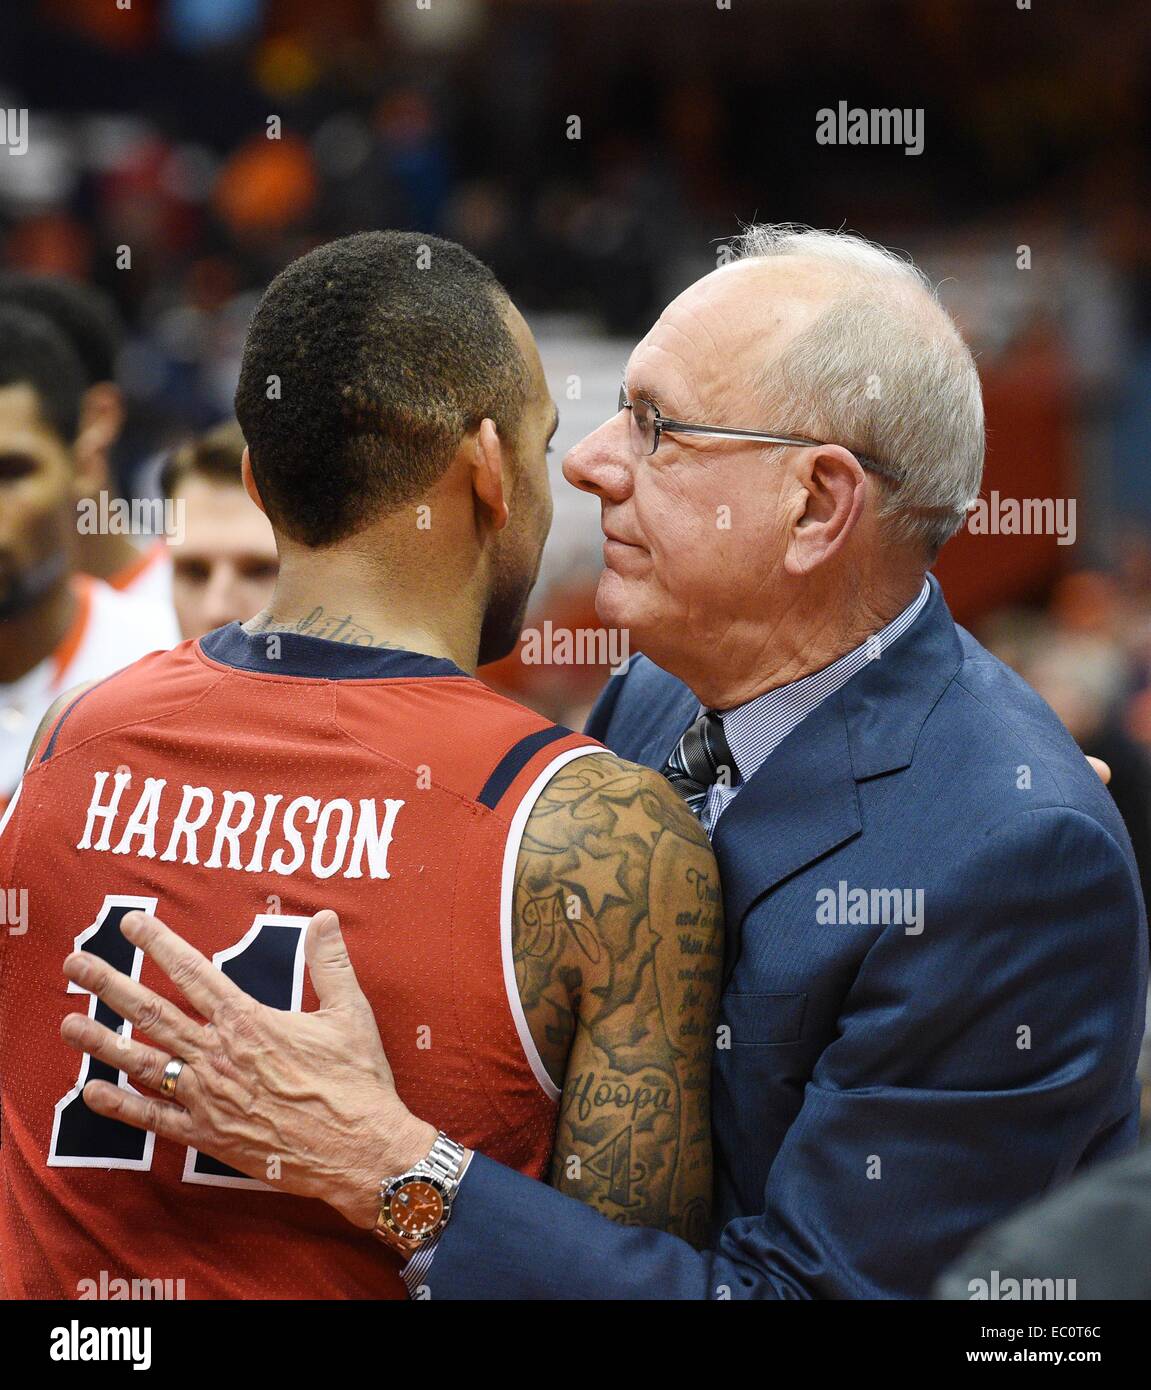 Syracuse, NY, USA. 6th Dec, 2014. Dec 6, 2014: Syracuse head coach Jim Boeheim greeted St. John's guard D'Angelo Harrison #11 after the St. John's Red Storm defeated the Syracuse Orange 69-57 at the Carrier Dome in Syracuse, NY. © csm/Alamy Live News Stock Photo